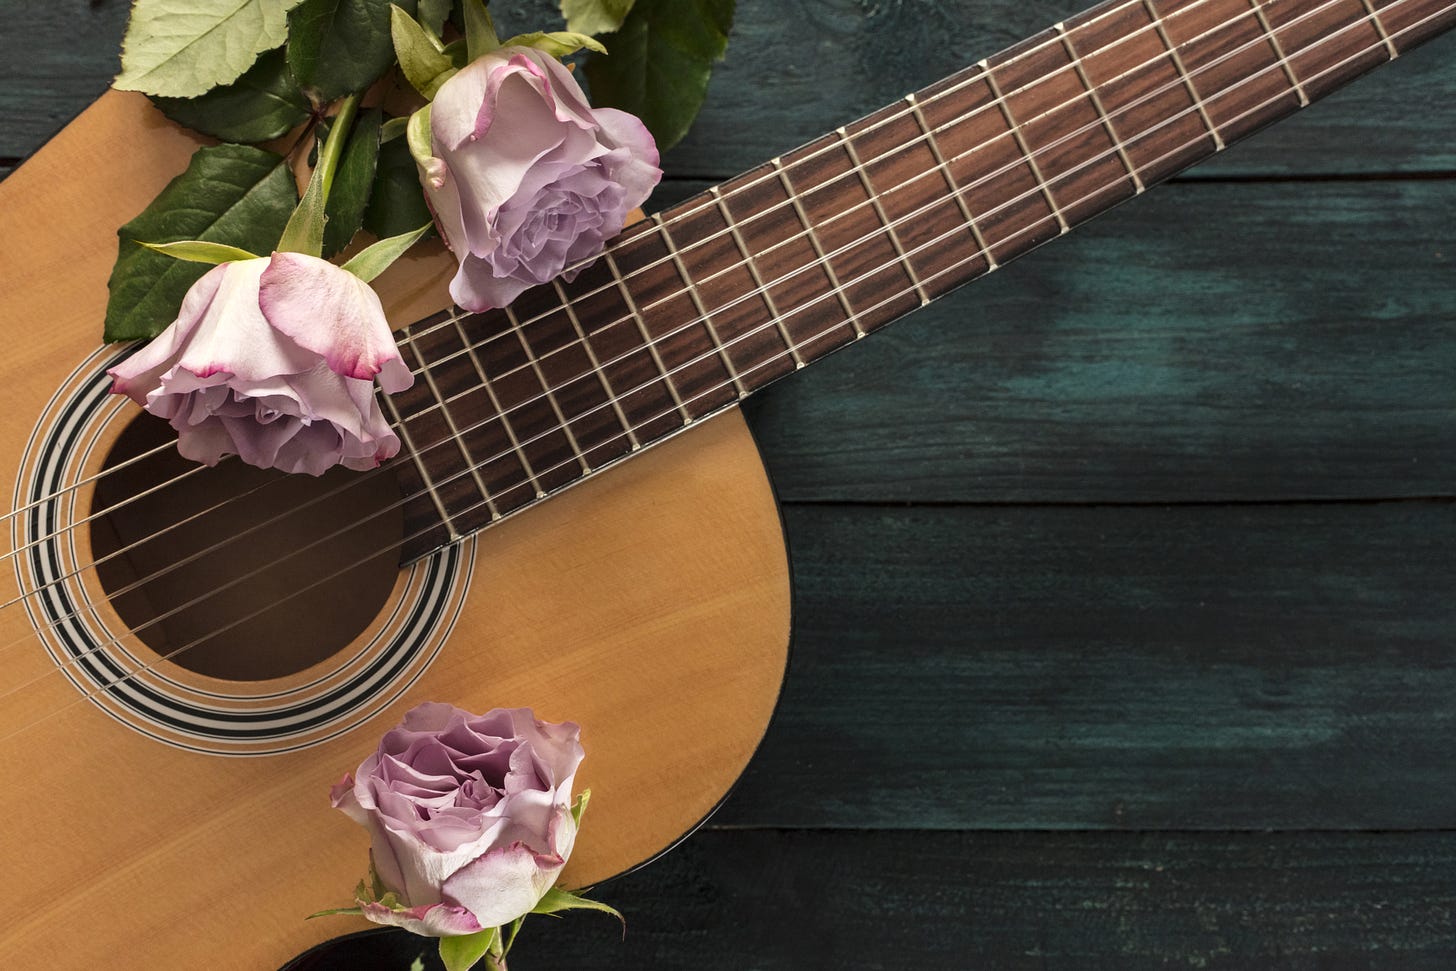 Image of a guitar on a wooden floor with pink roses